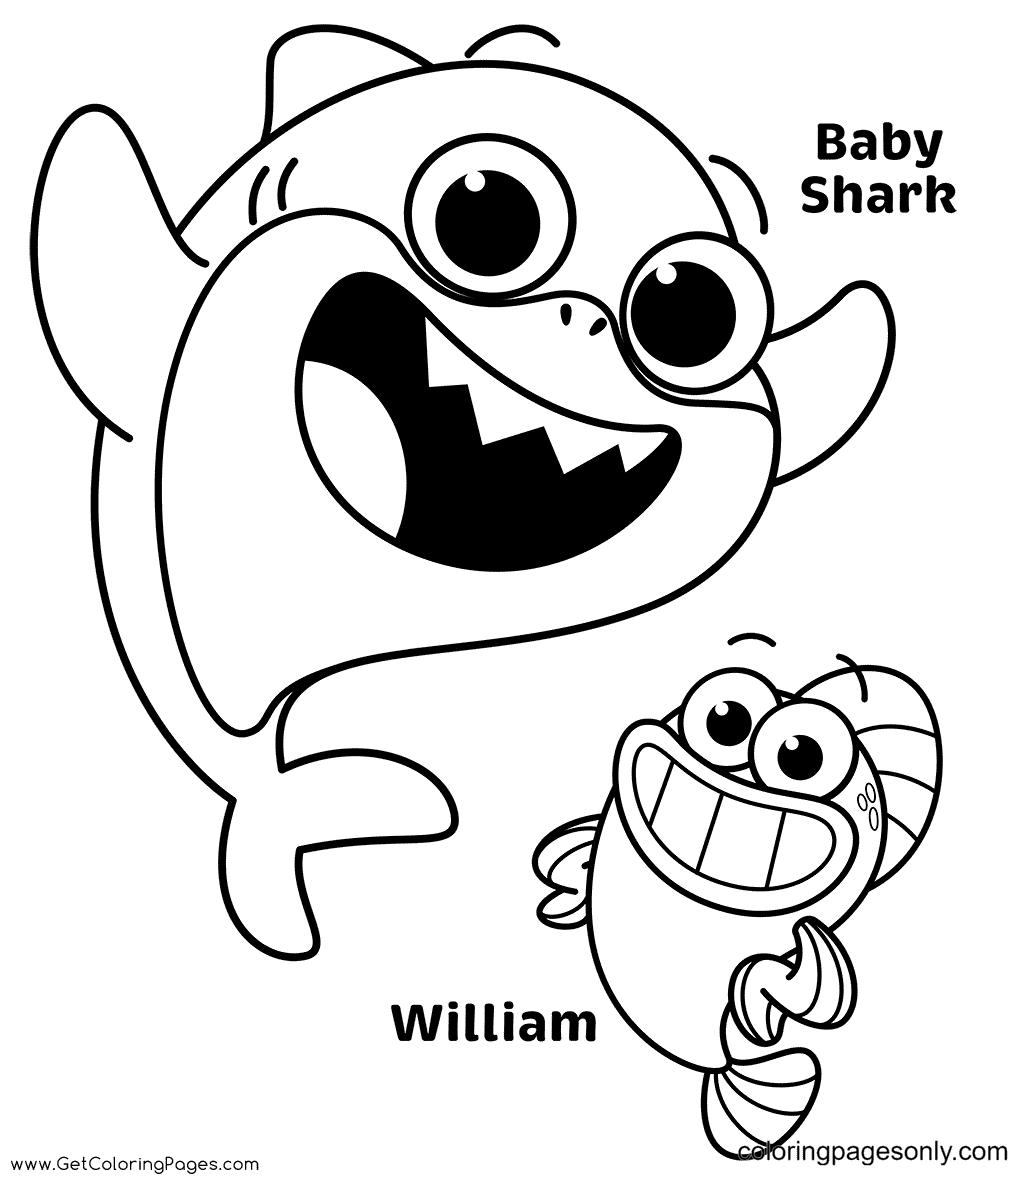 Baby Shark and William Coloring Page